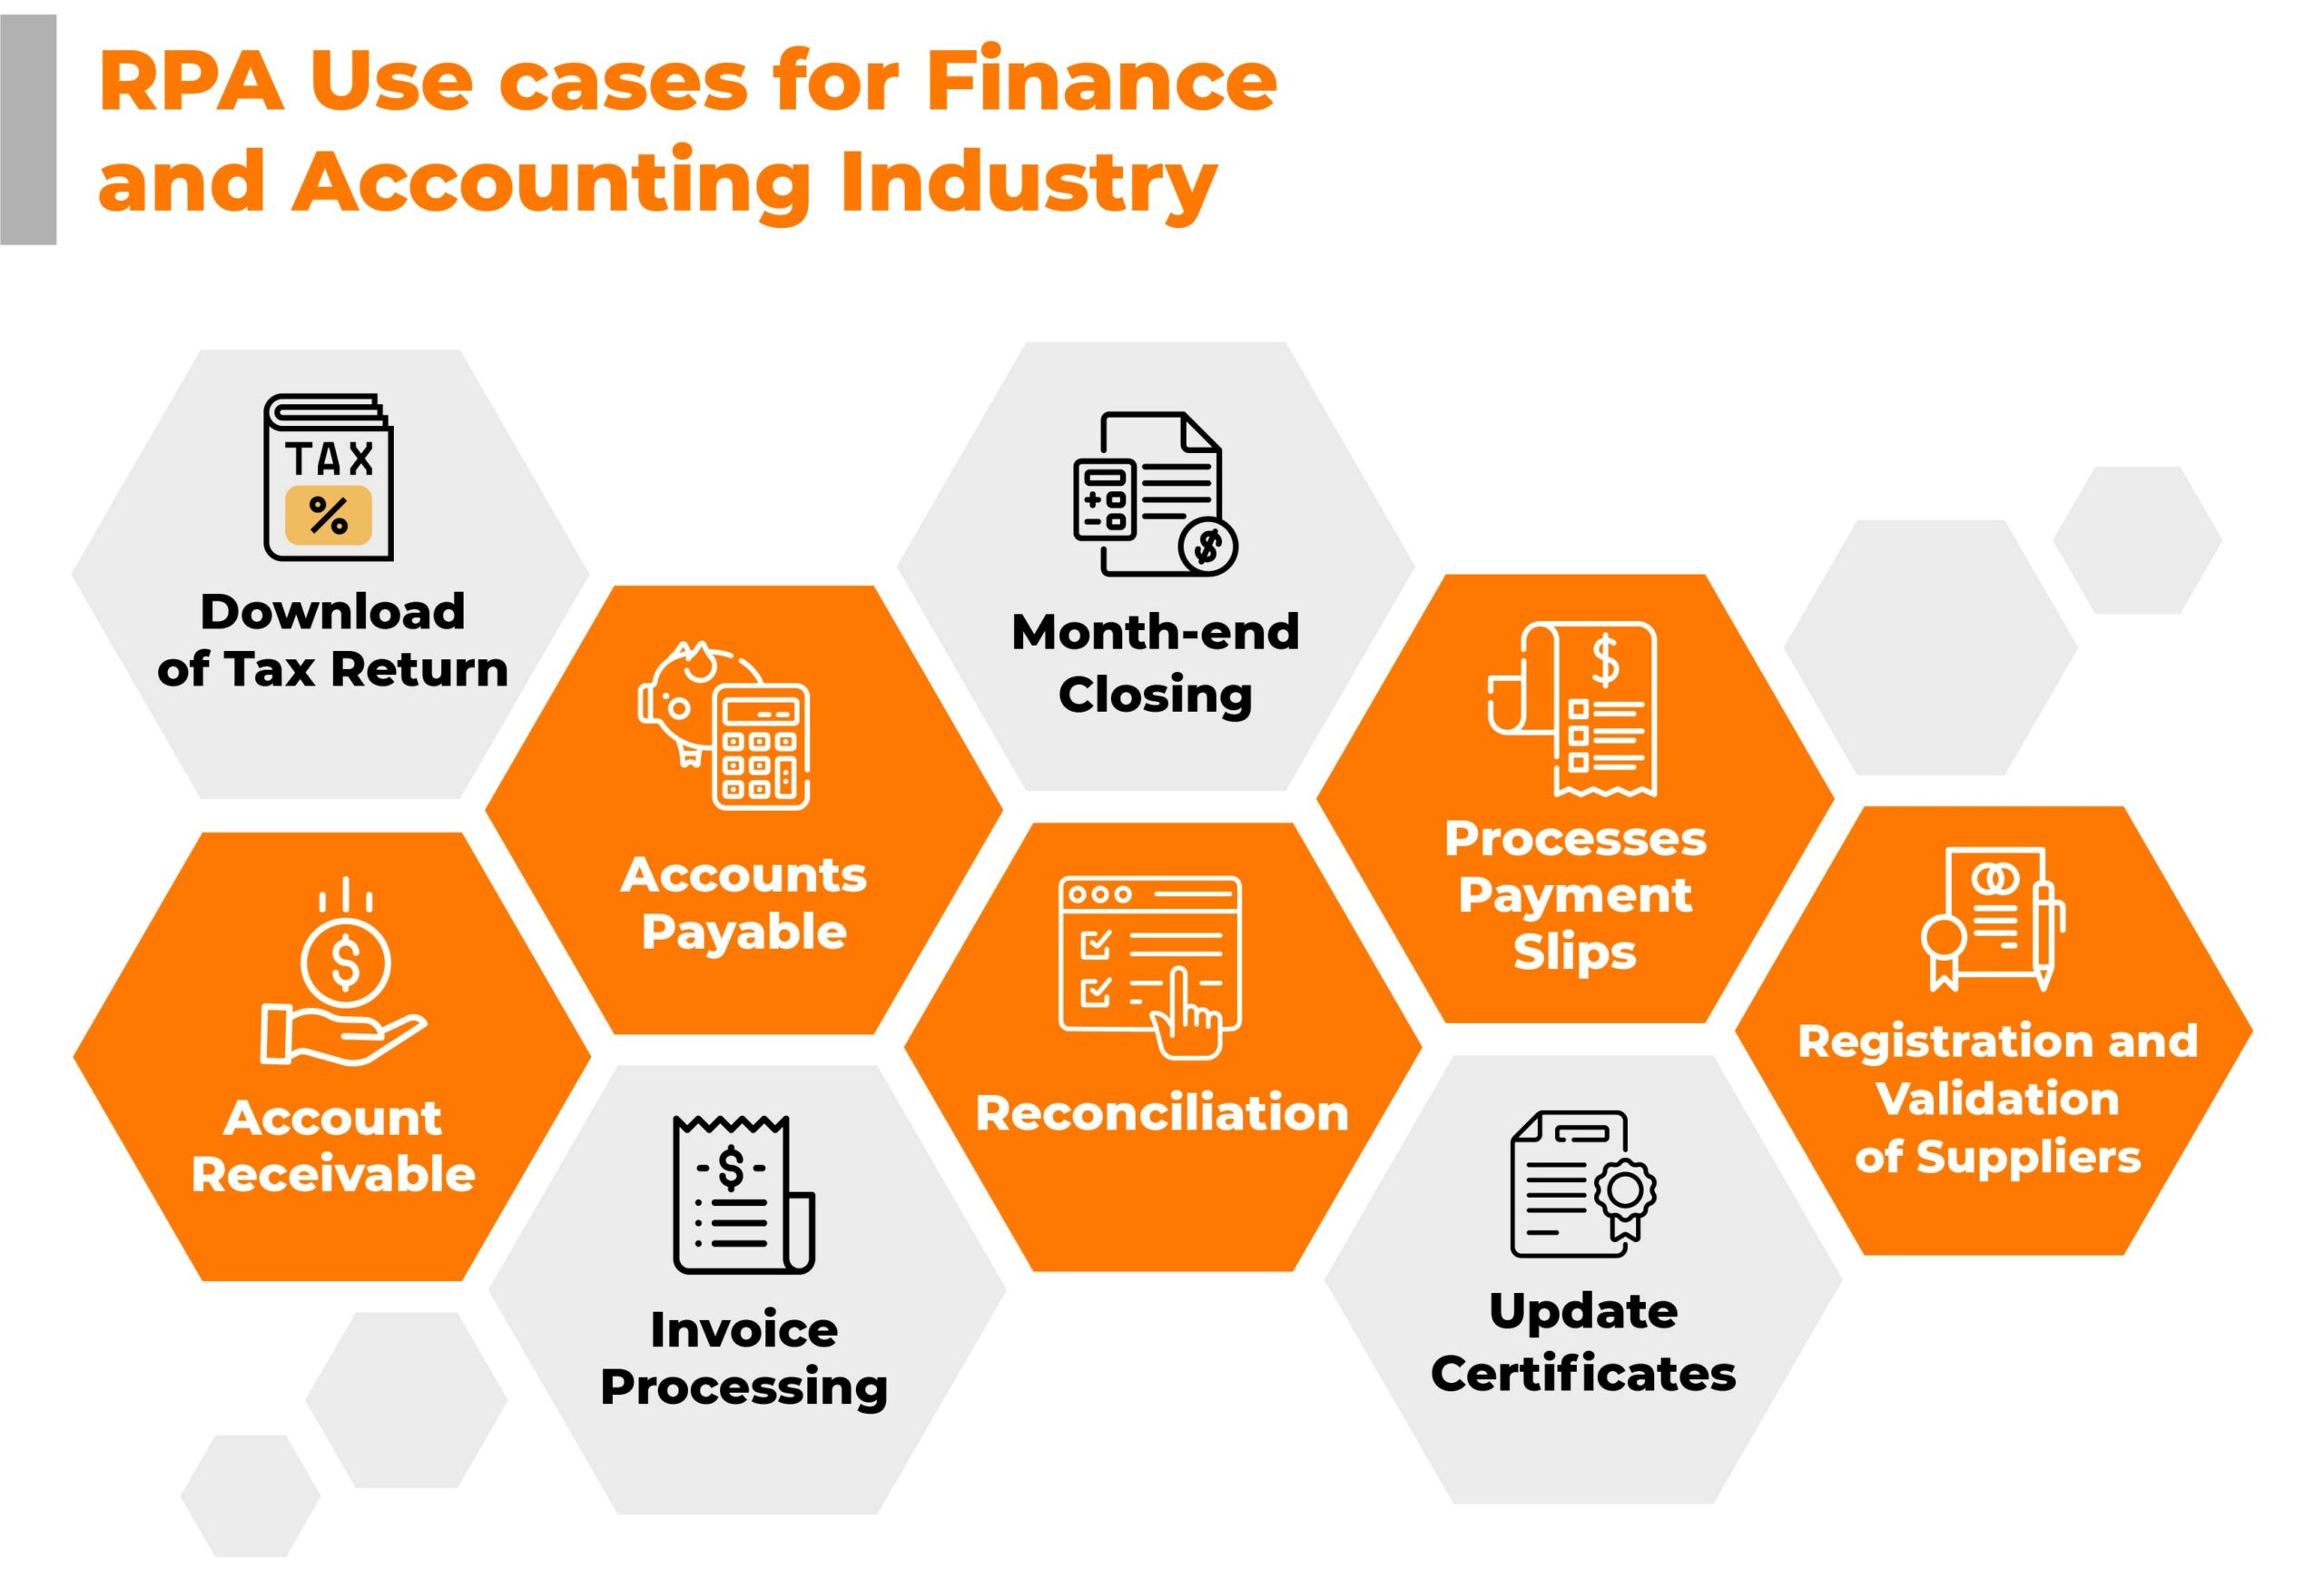 RPA Use cases for Finance and Accounting Industry